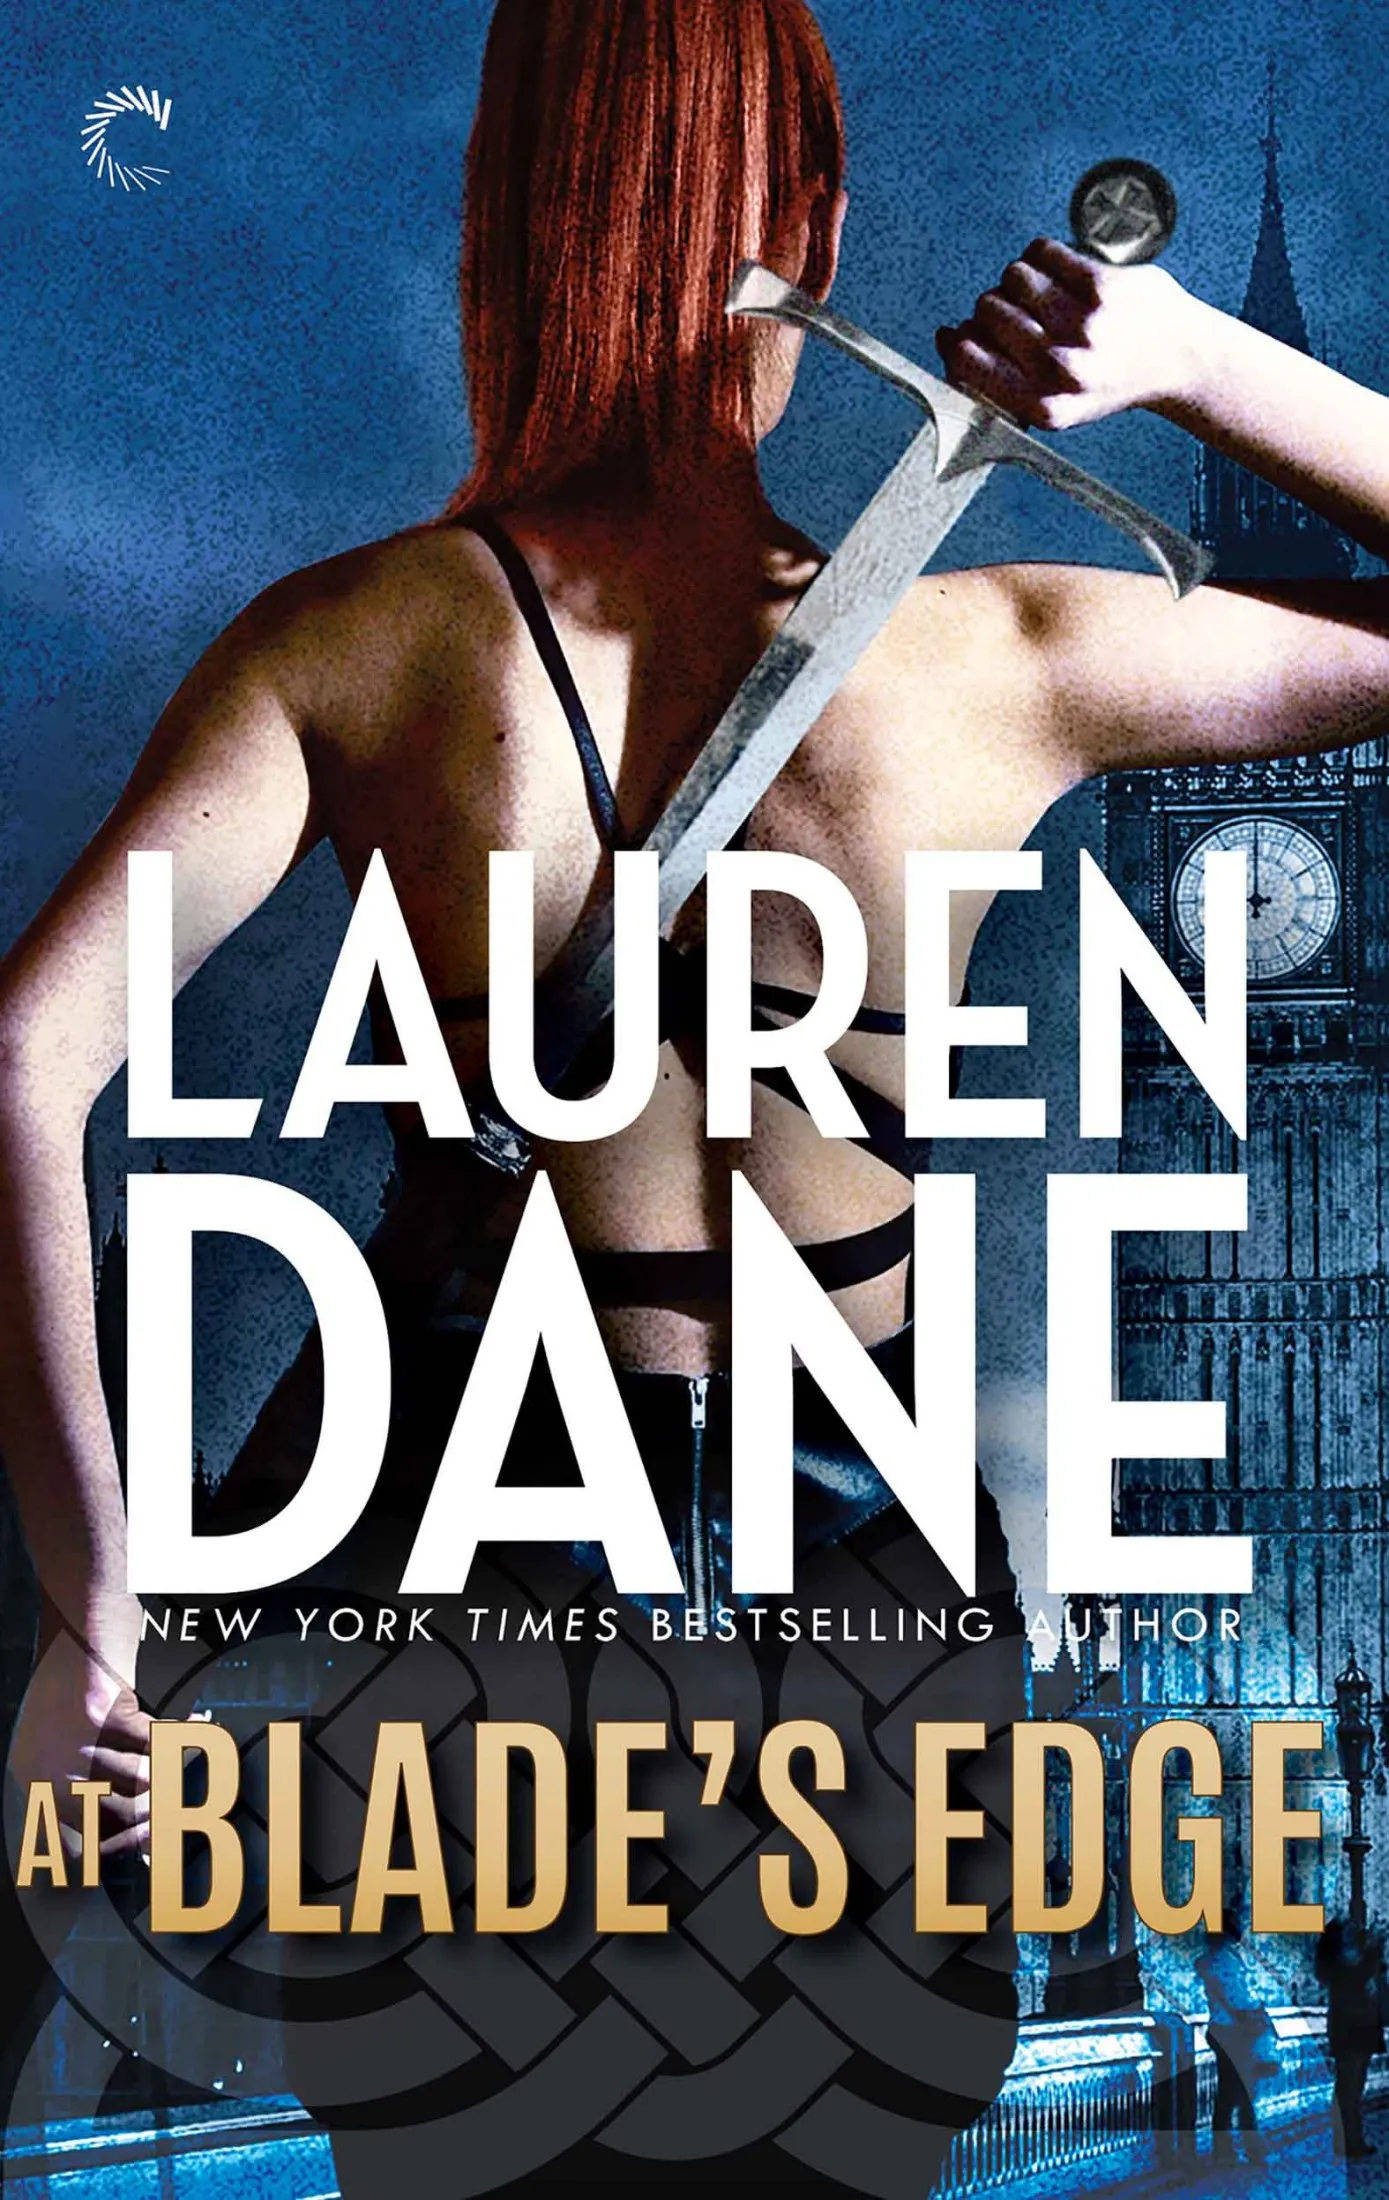 At Blade's Edge (Goddess with a Blade #4)